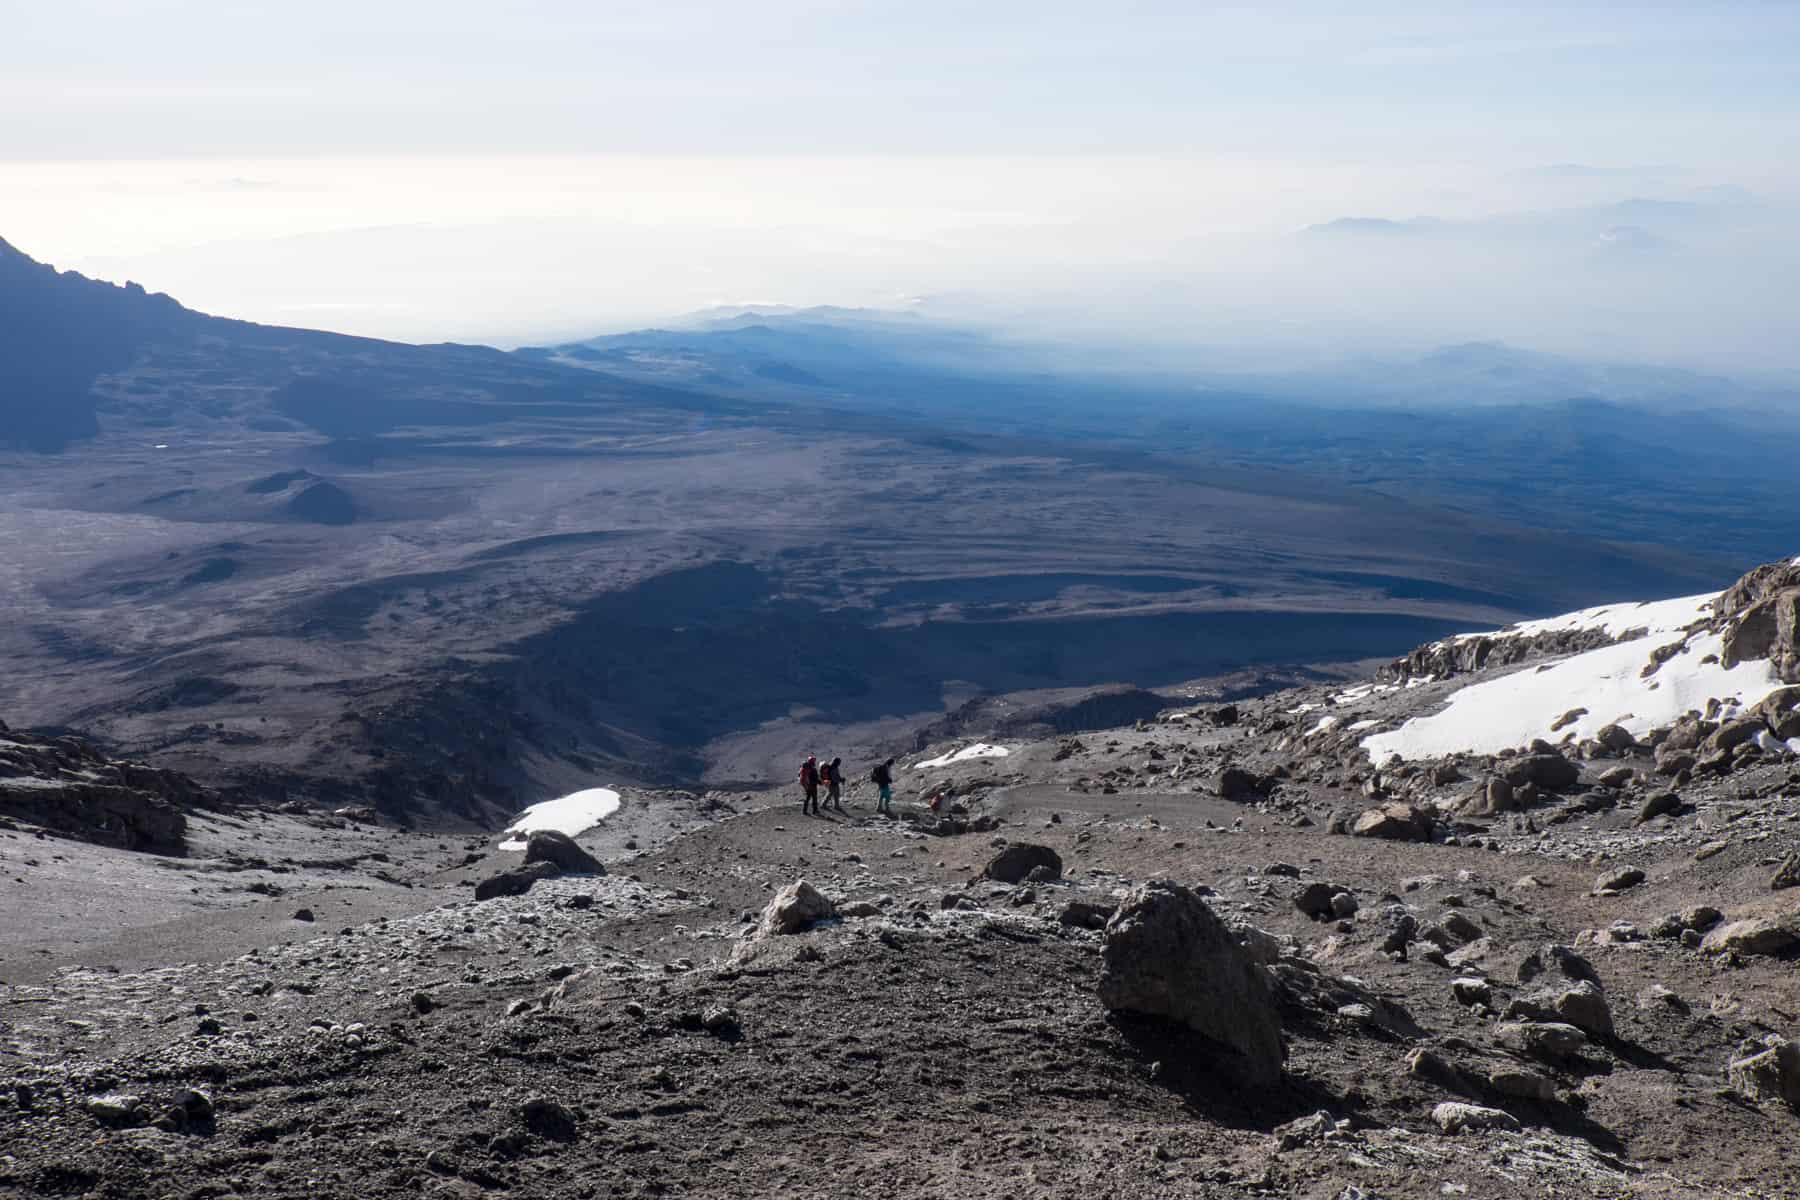 Three people, tiny in comparison to the wide rocky landscape, walk up a steep mountain slope towards a large patch of snow. In the background are more brown, rocky mountain slopes. 